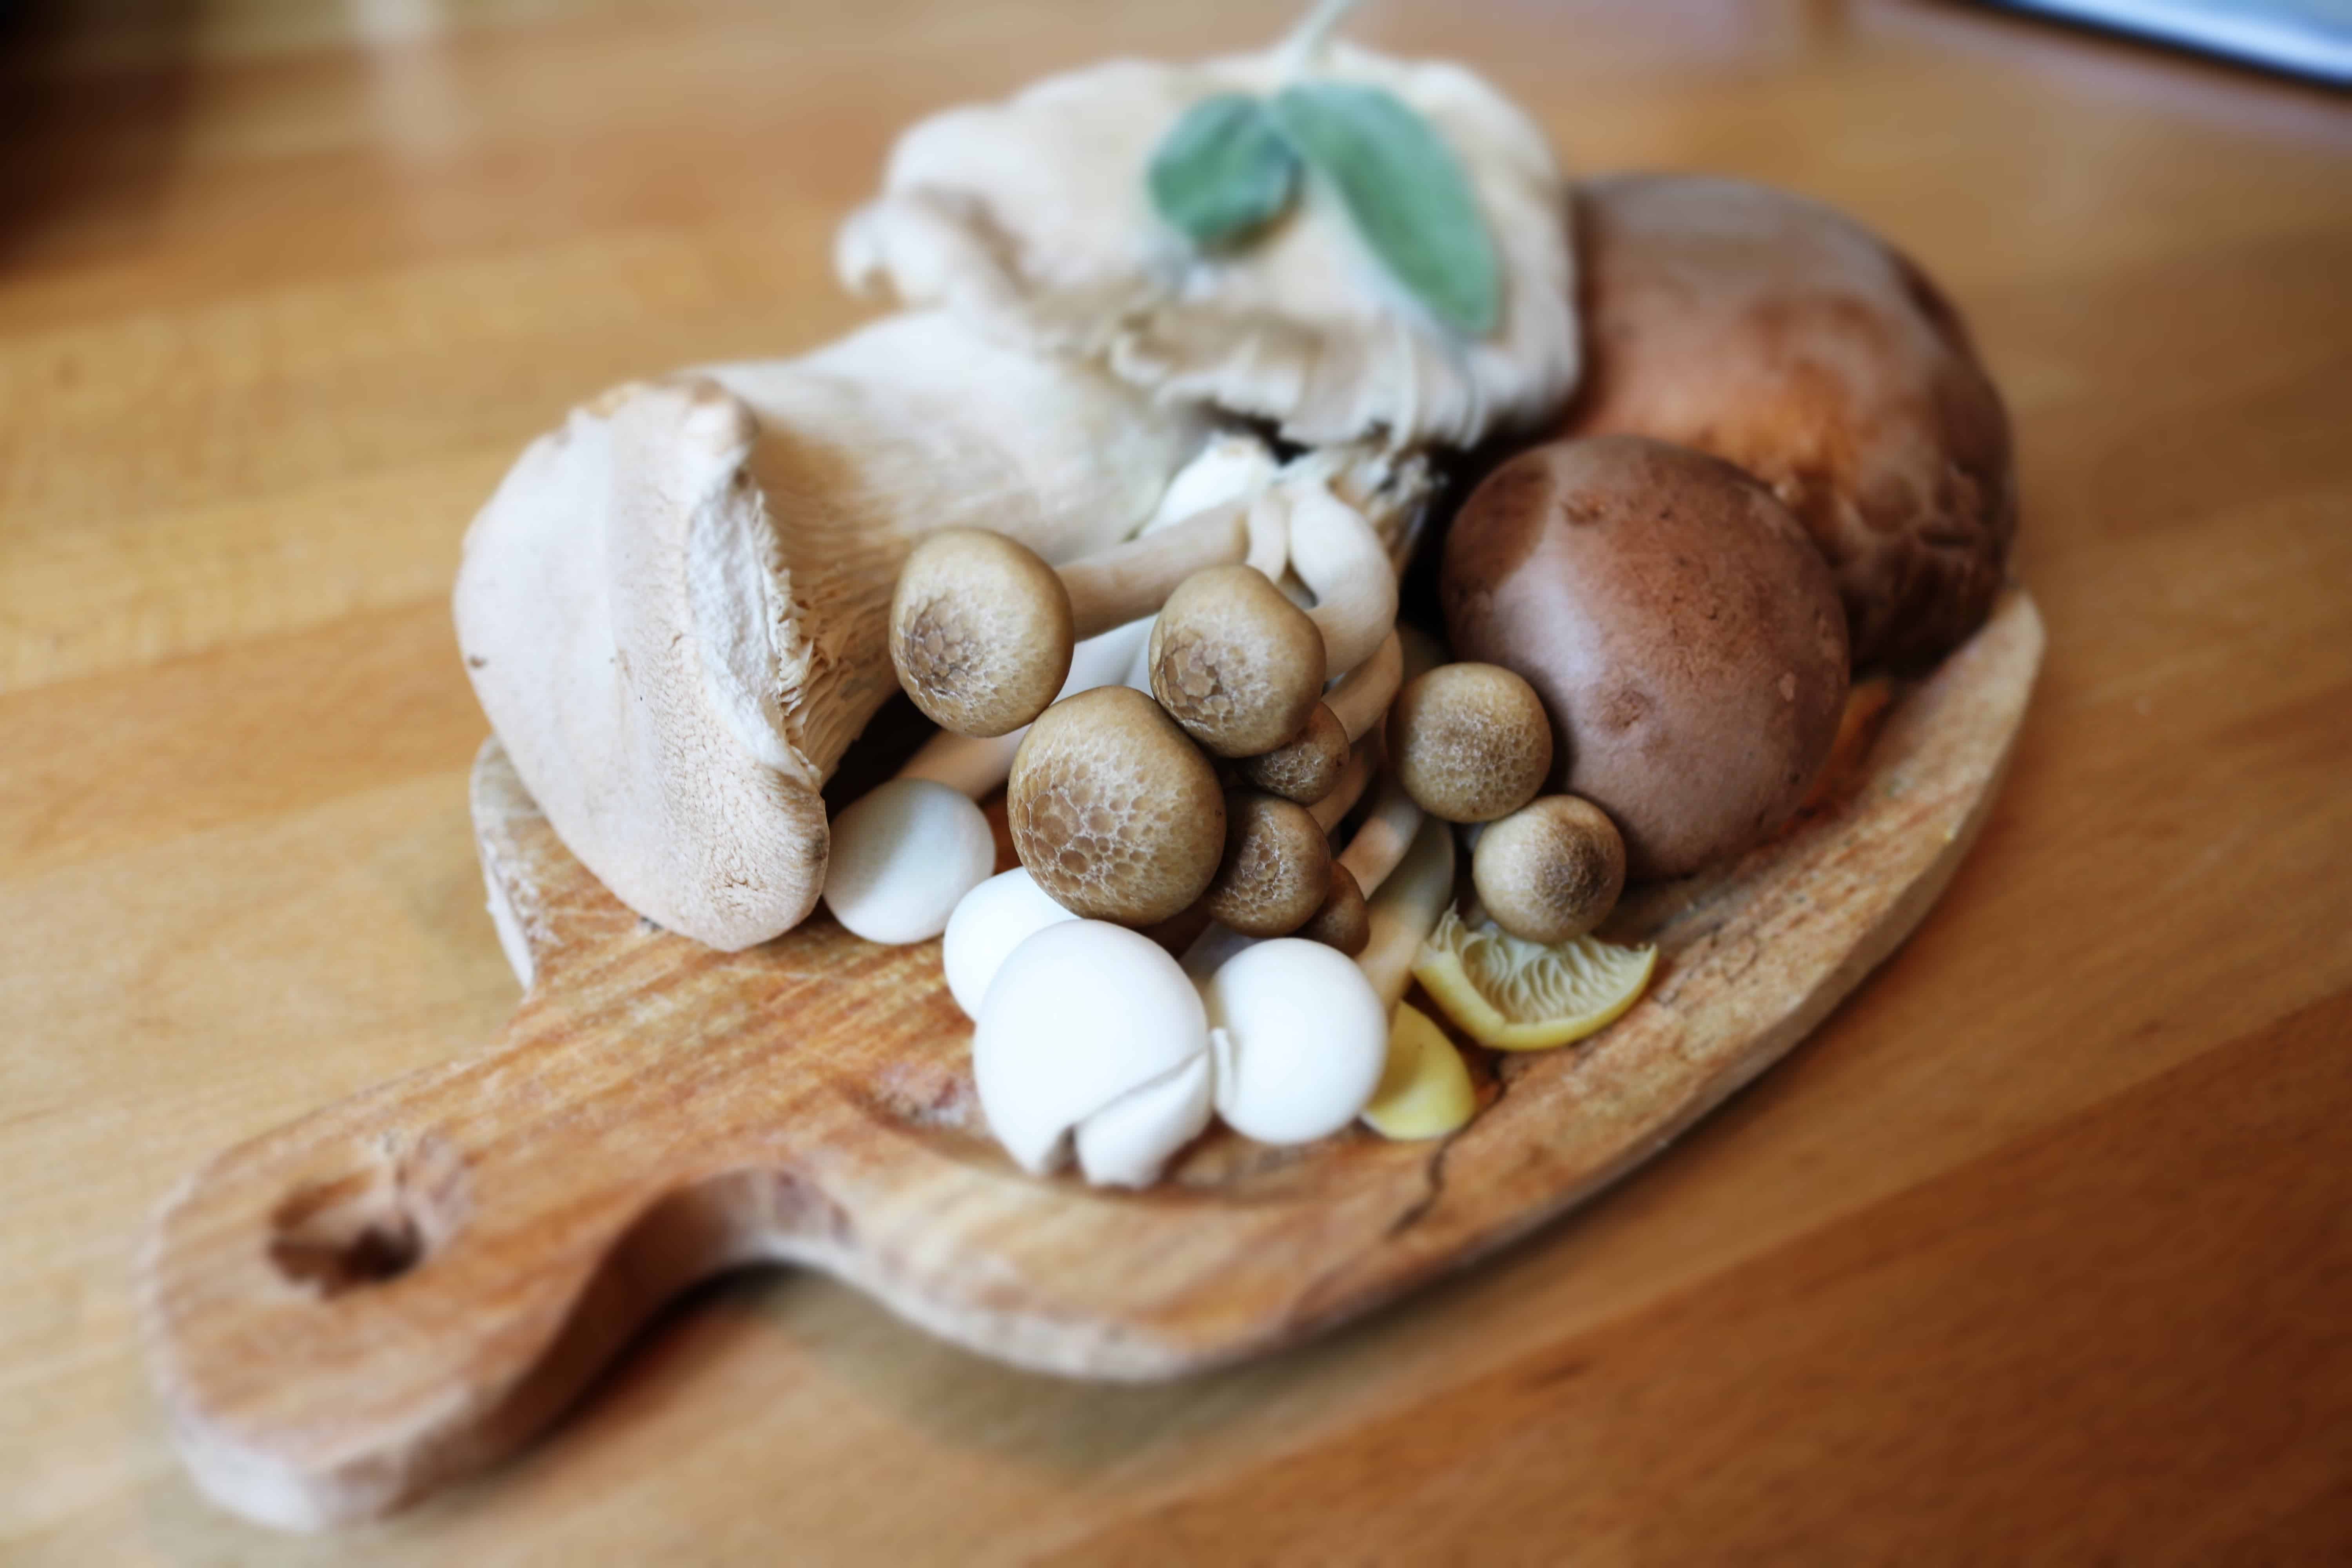 Want to keep mushrooms delicious and nutritious? Grill or microwave them, researchers say. Image via Pexels.